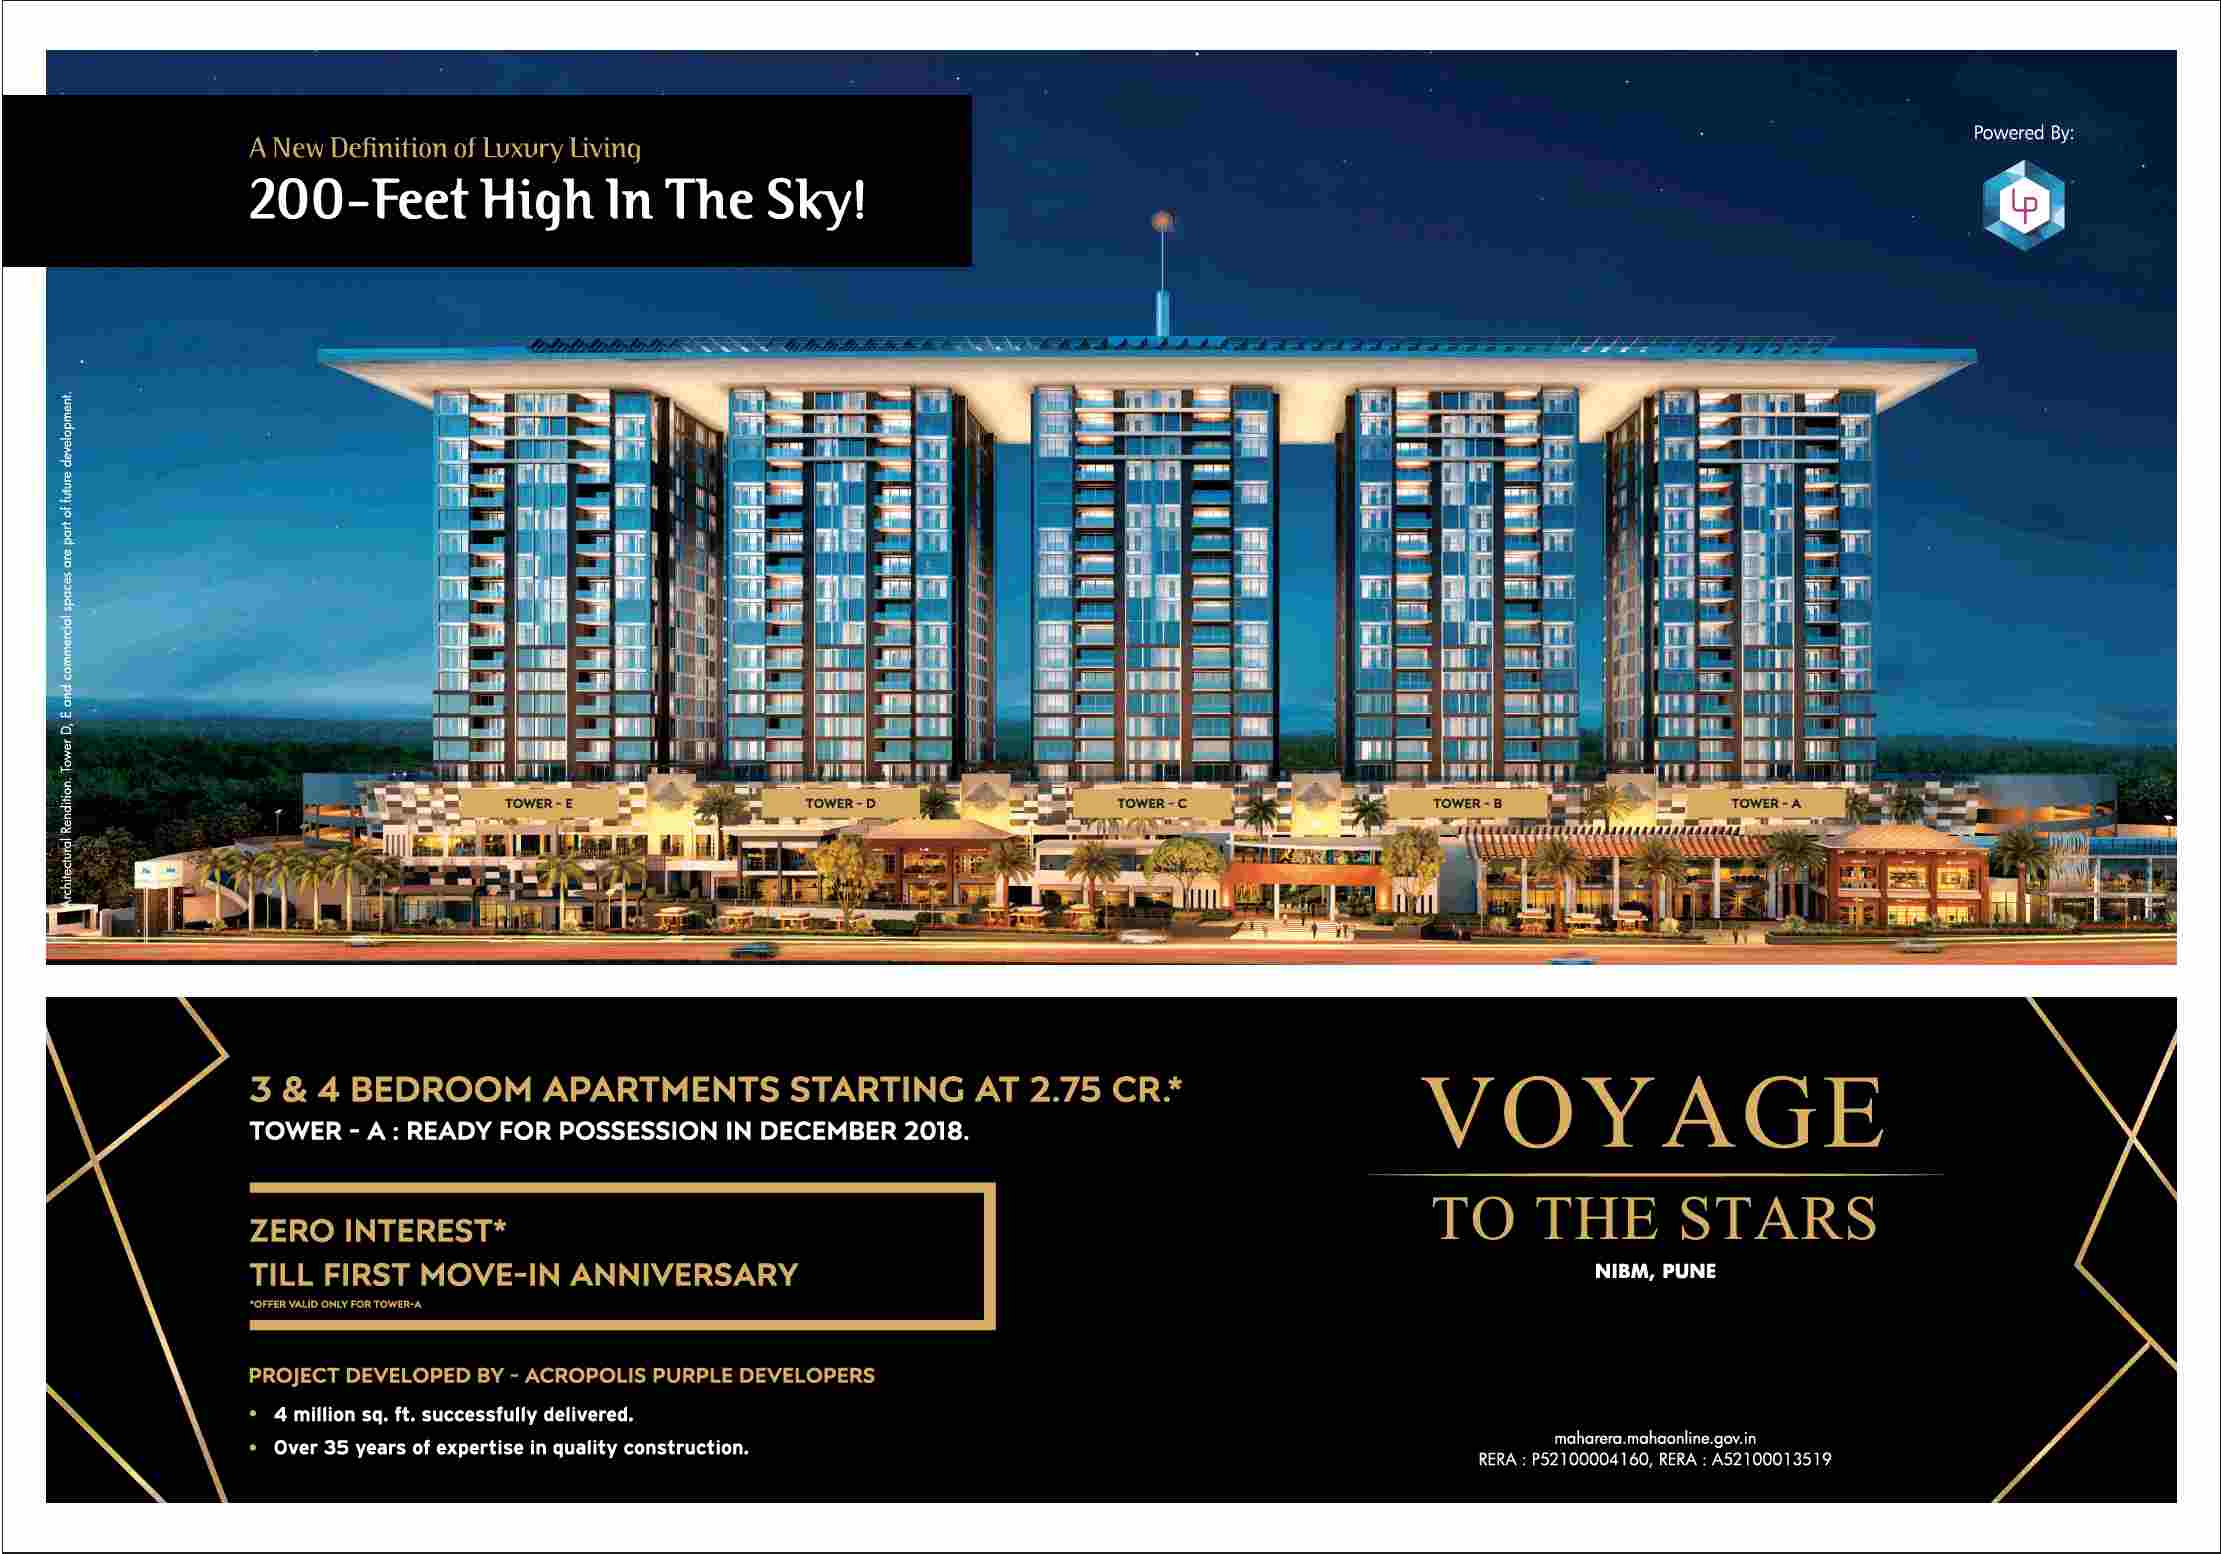 Book 3 & 4 bedroom apartments @ Rs 2.75 cr at Acropolis Voyage To The Star in Pune Update